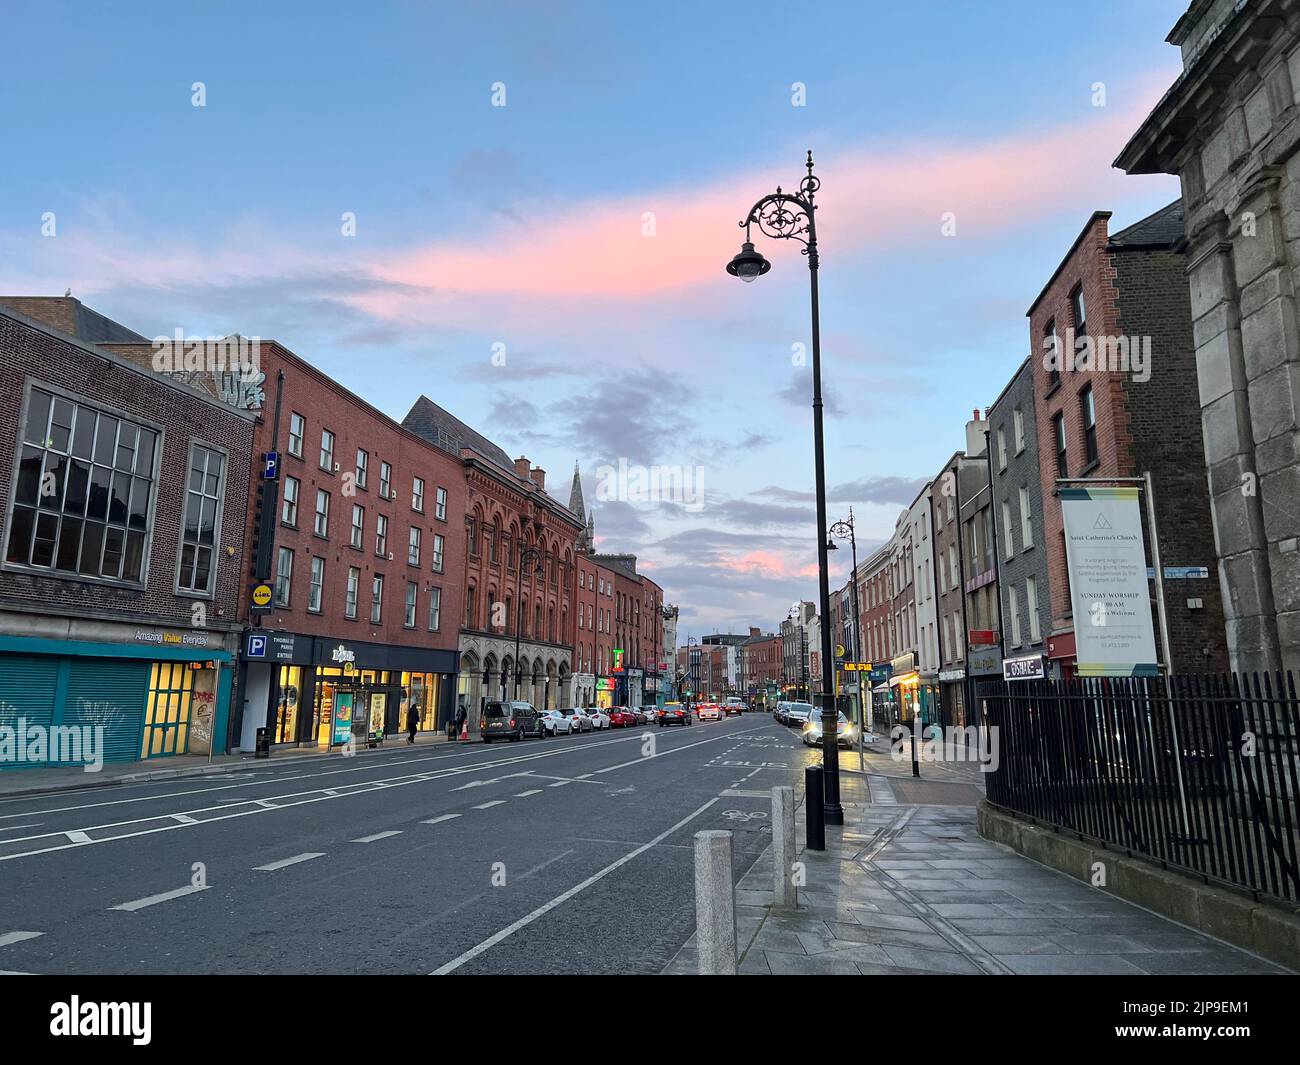 A scenic view of the street in Dublin, Ireland at sunset Stock Photo